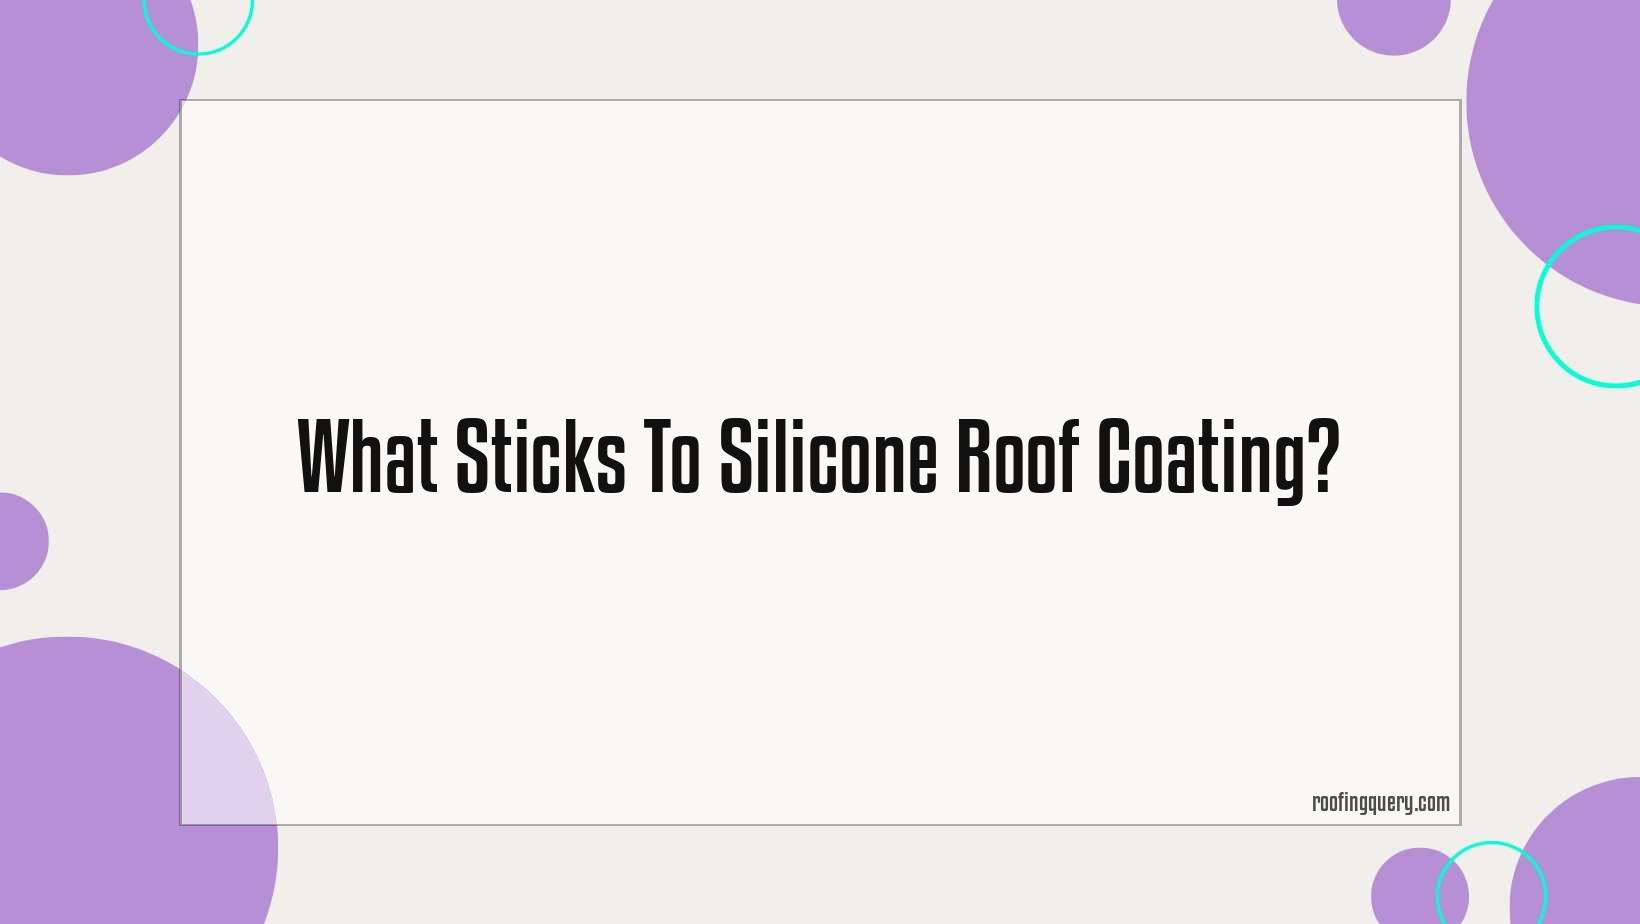 What Sticks To Silicone Roof Coating?